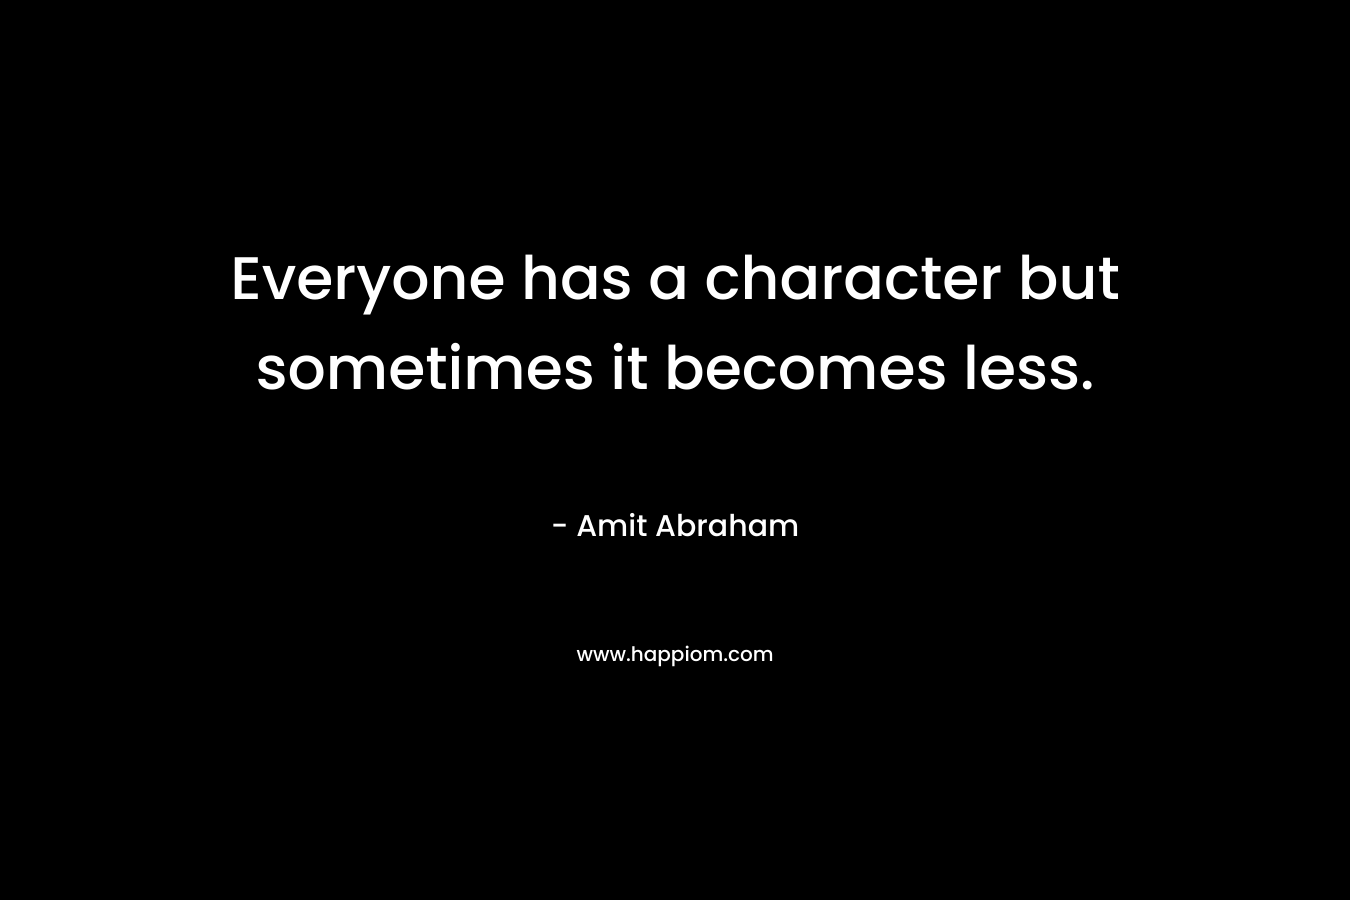 Everyone has a character but sometimes it becomes less.